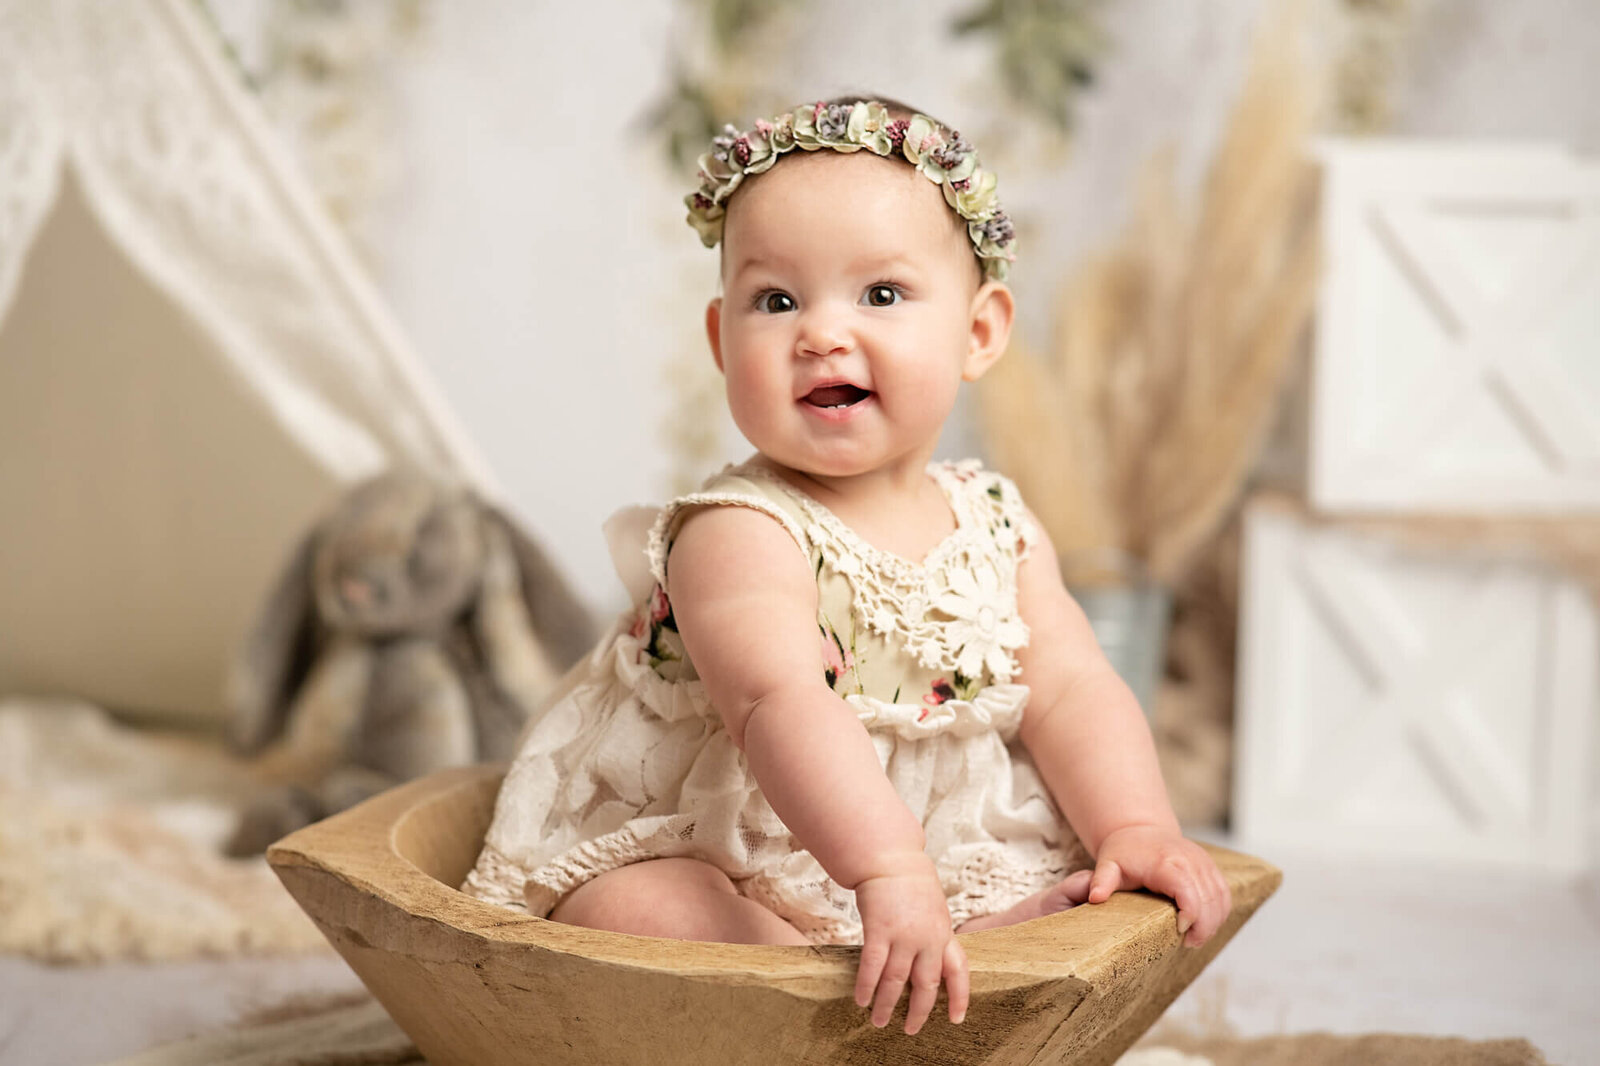 7 month old girl smiling in wooden bowl